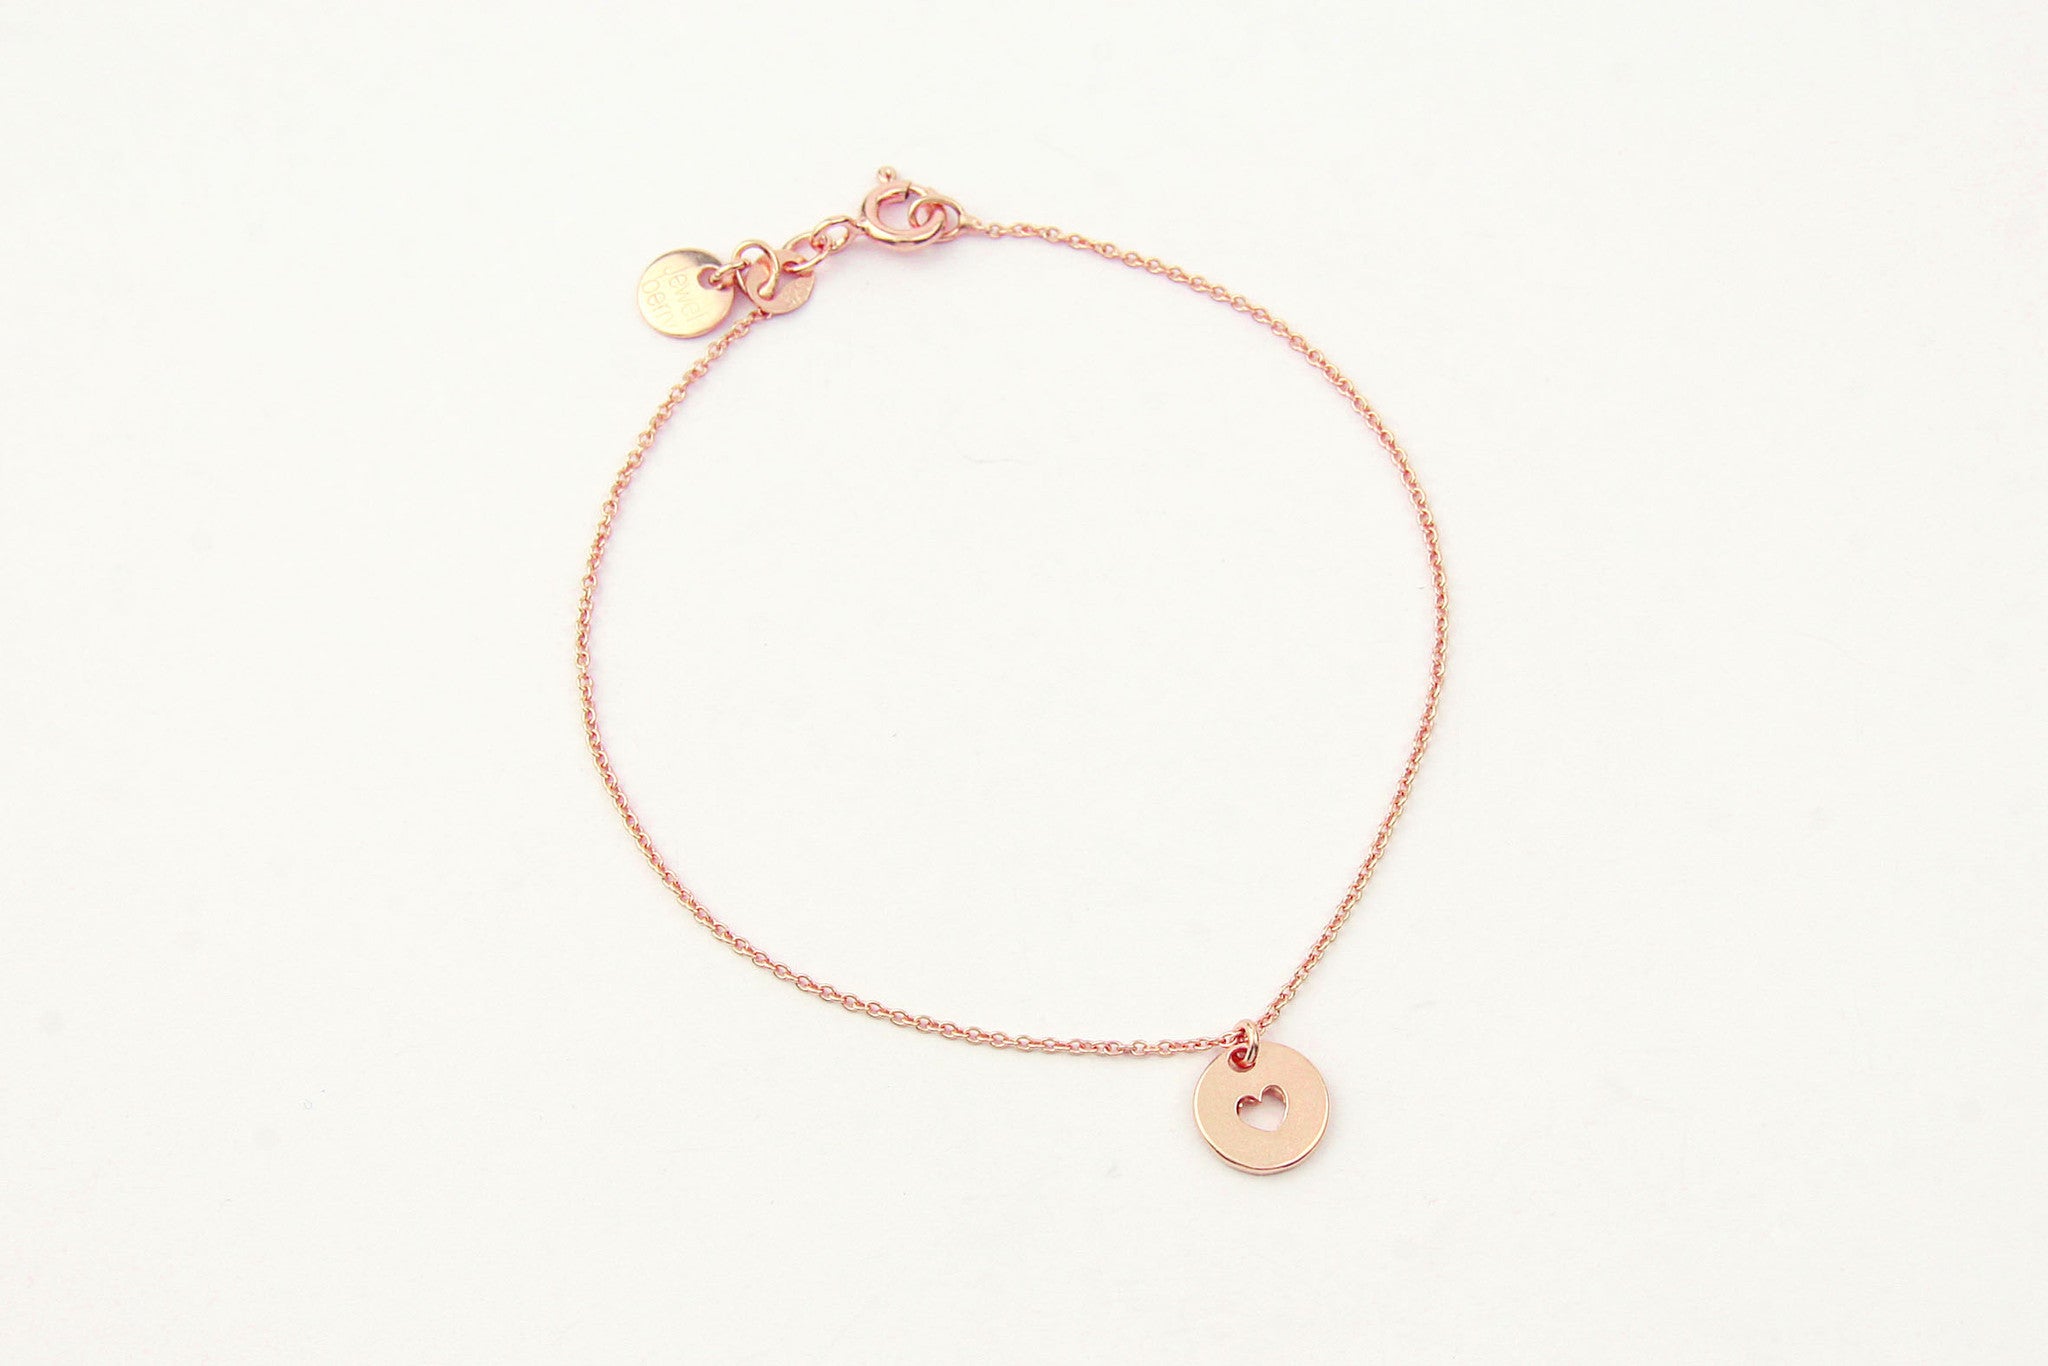 jewelberry armband bracelet love token rose gold plated sterling silver fine jewelry handmade with love fairtrade anchor chain